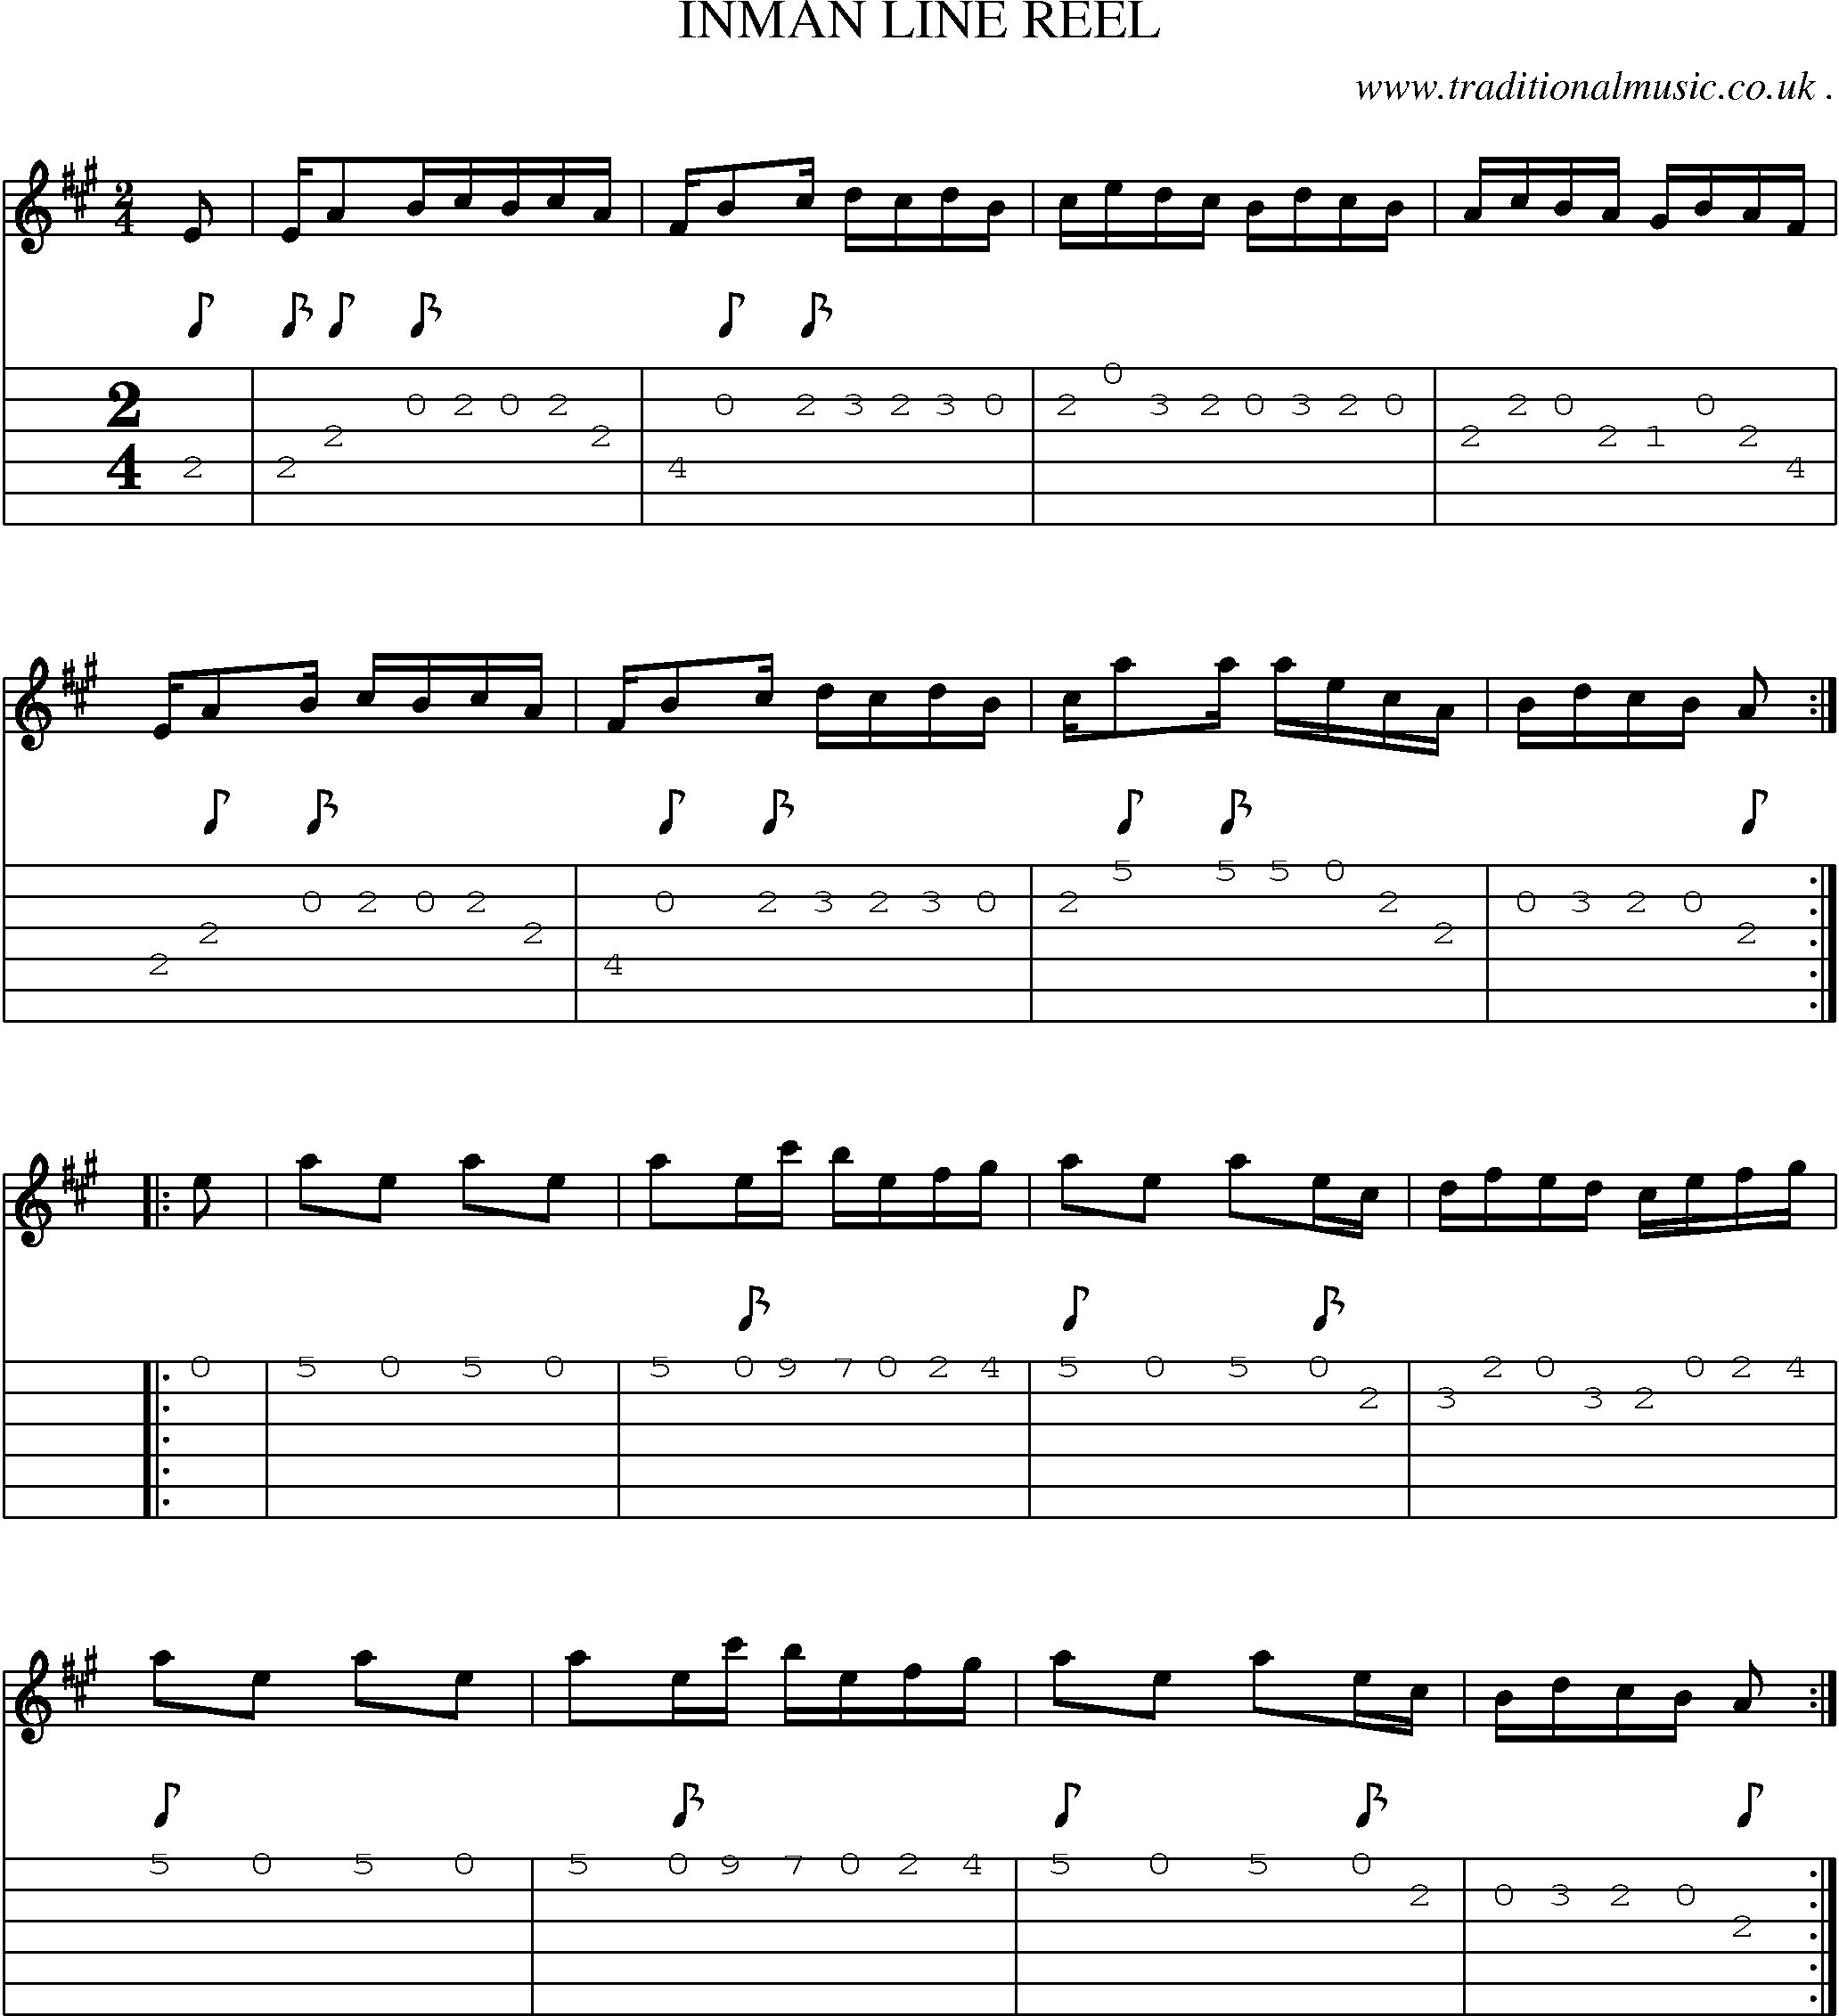 Sheet-Music and Guitar Tabs for Inman Line Reel